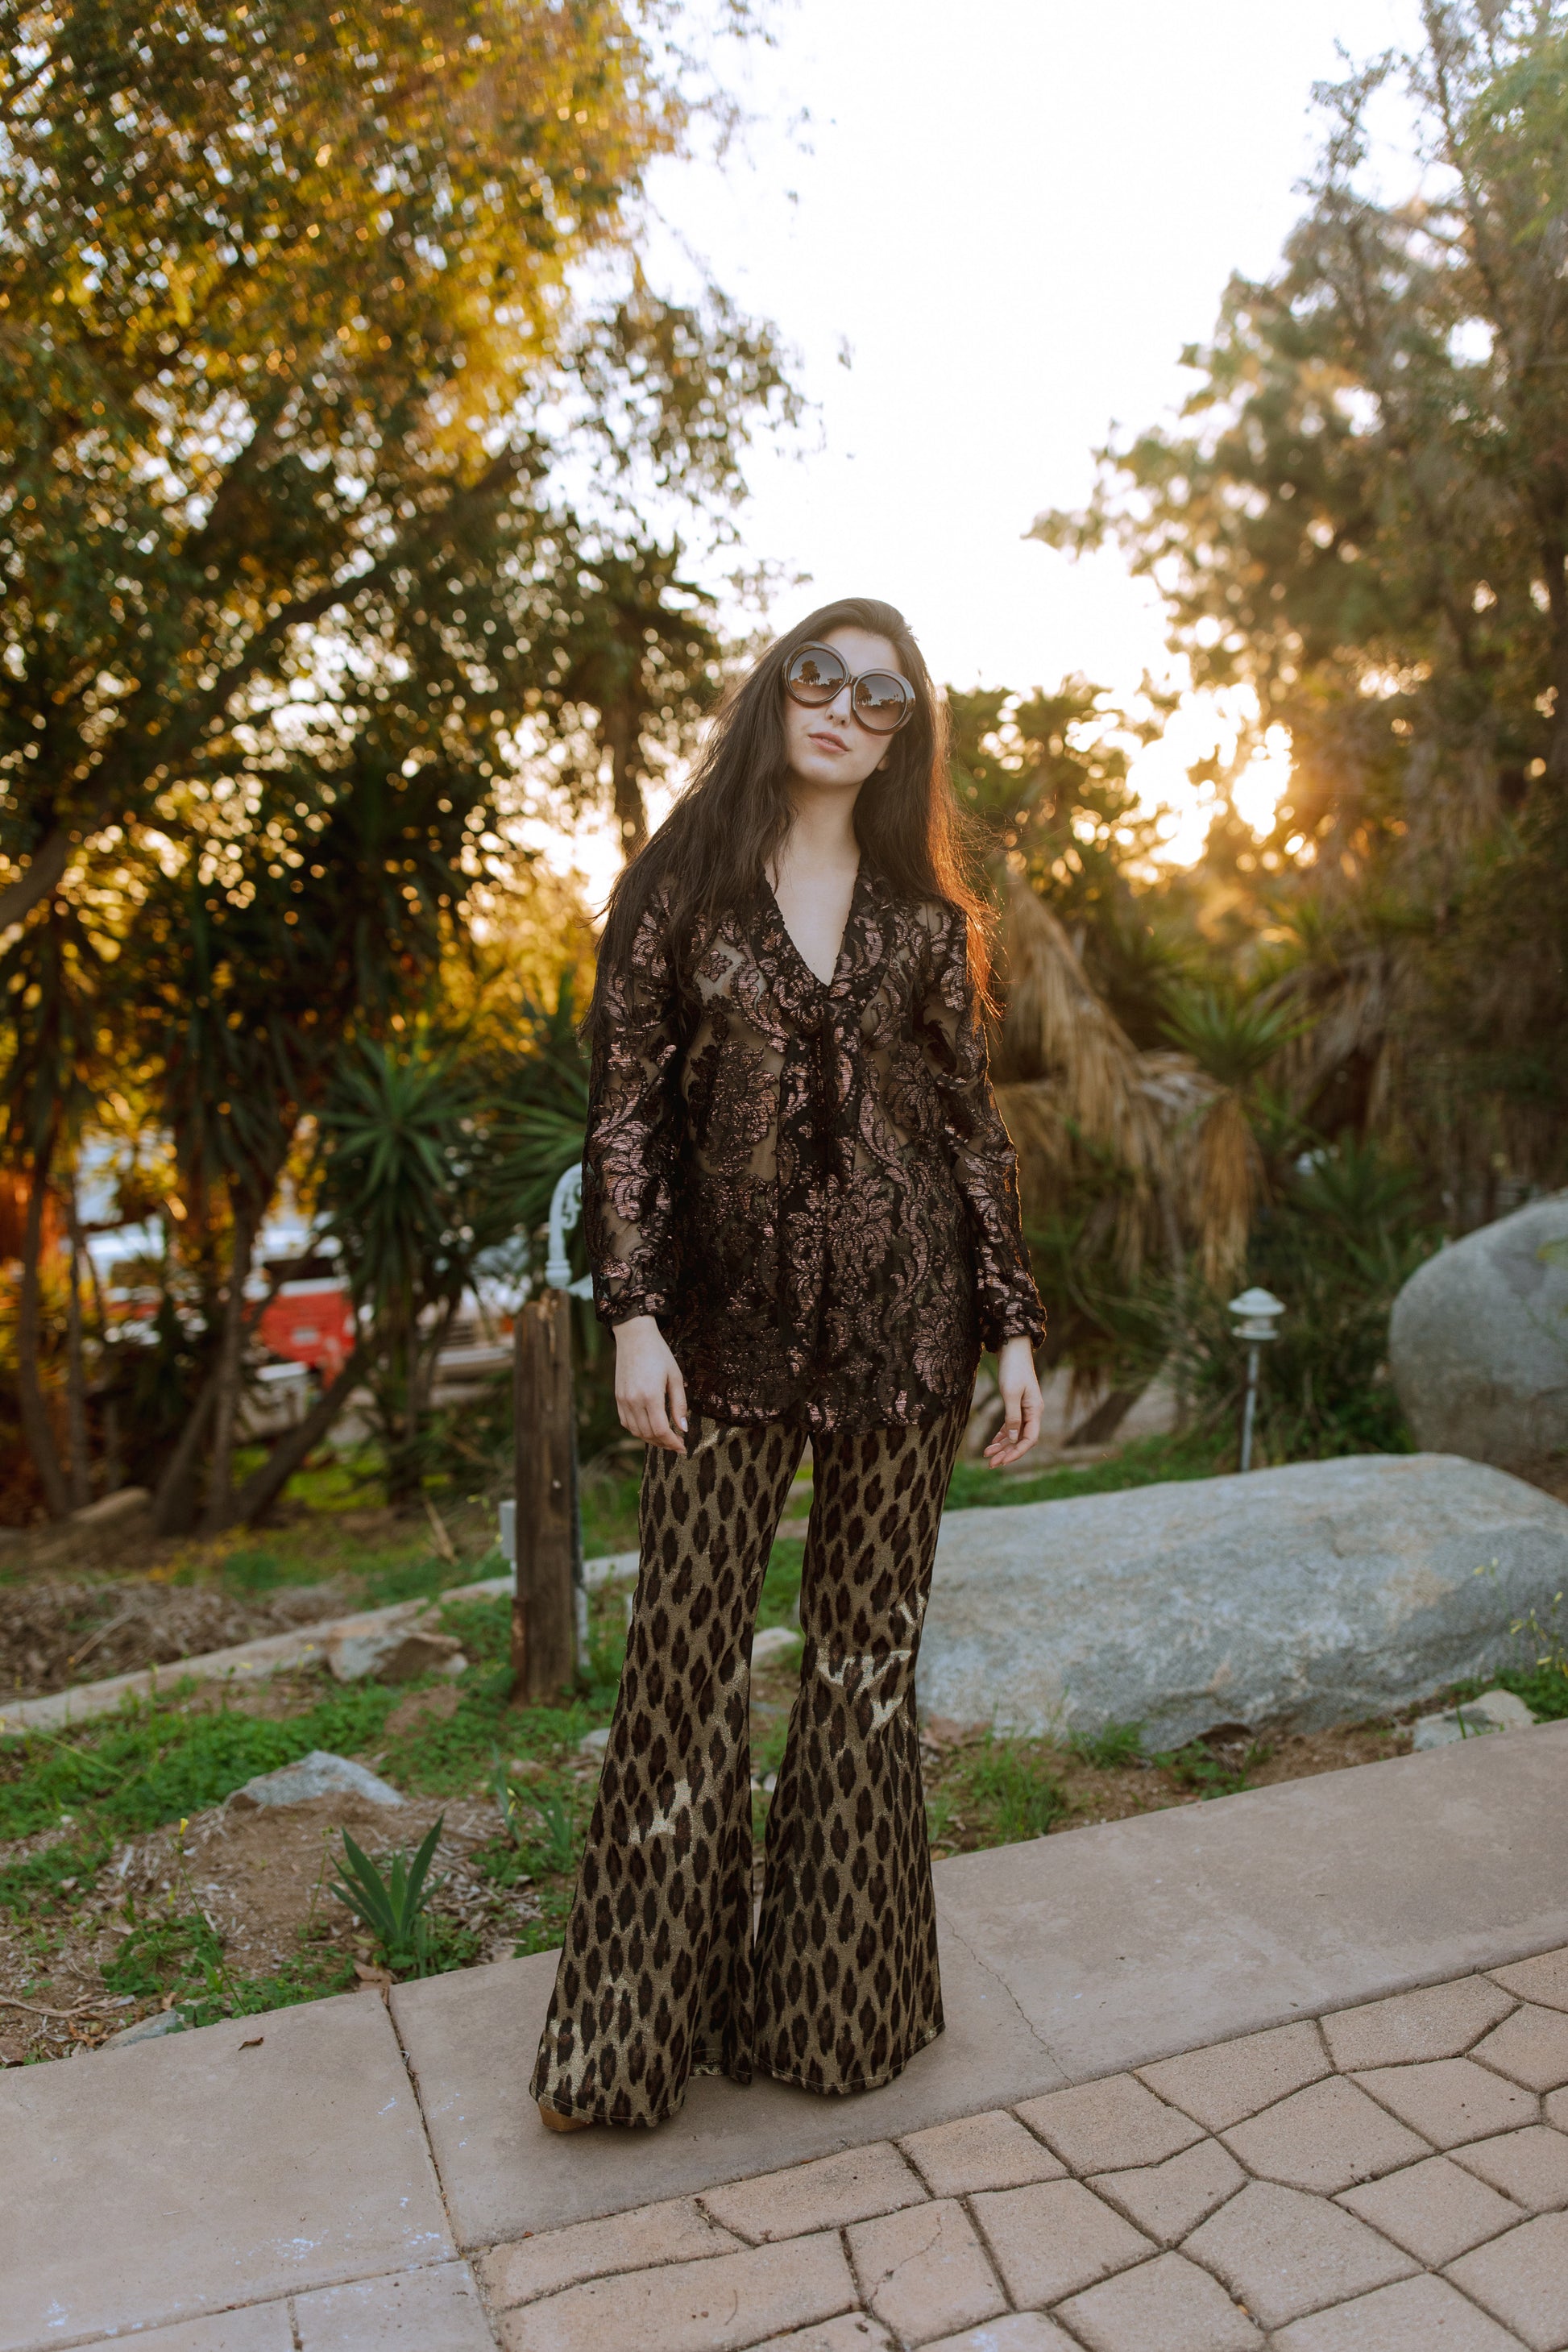 jennafer grace Leopard Shimmer Bellbottoms metallic gold with brown black leopard animal print flared palazzo bellbottom boho bohemian hippie romantic whimsical unisex handmade in California USA